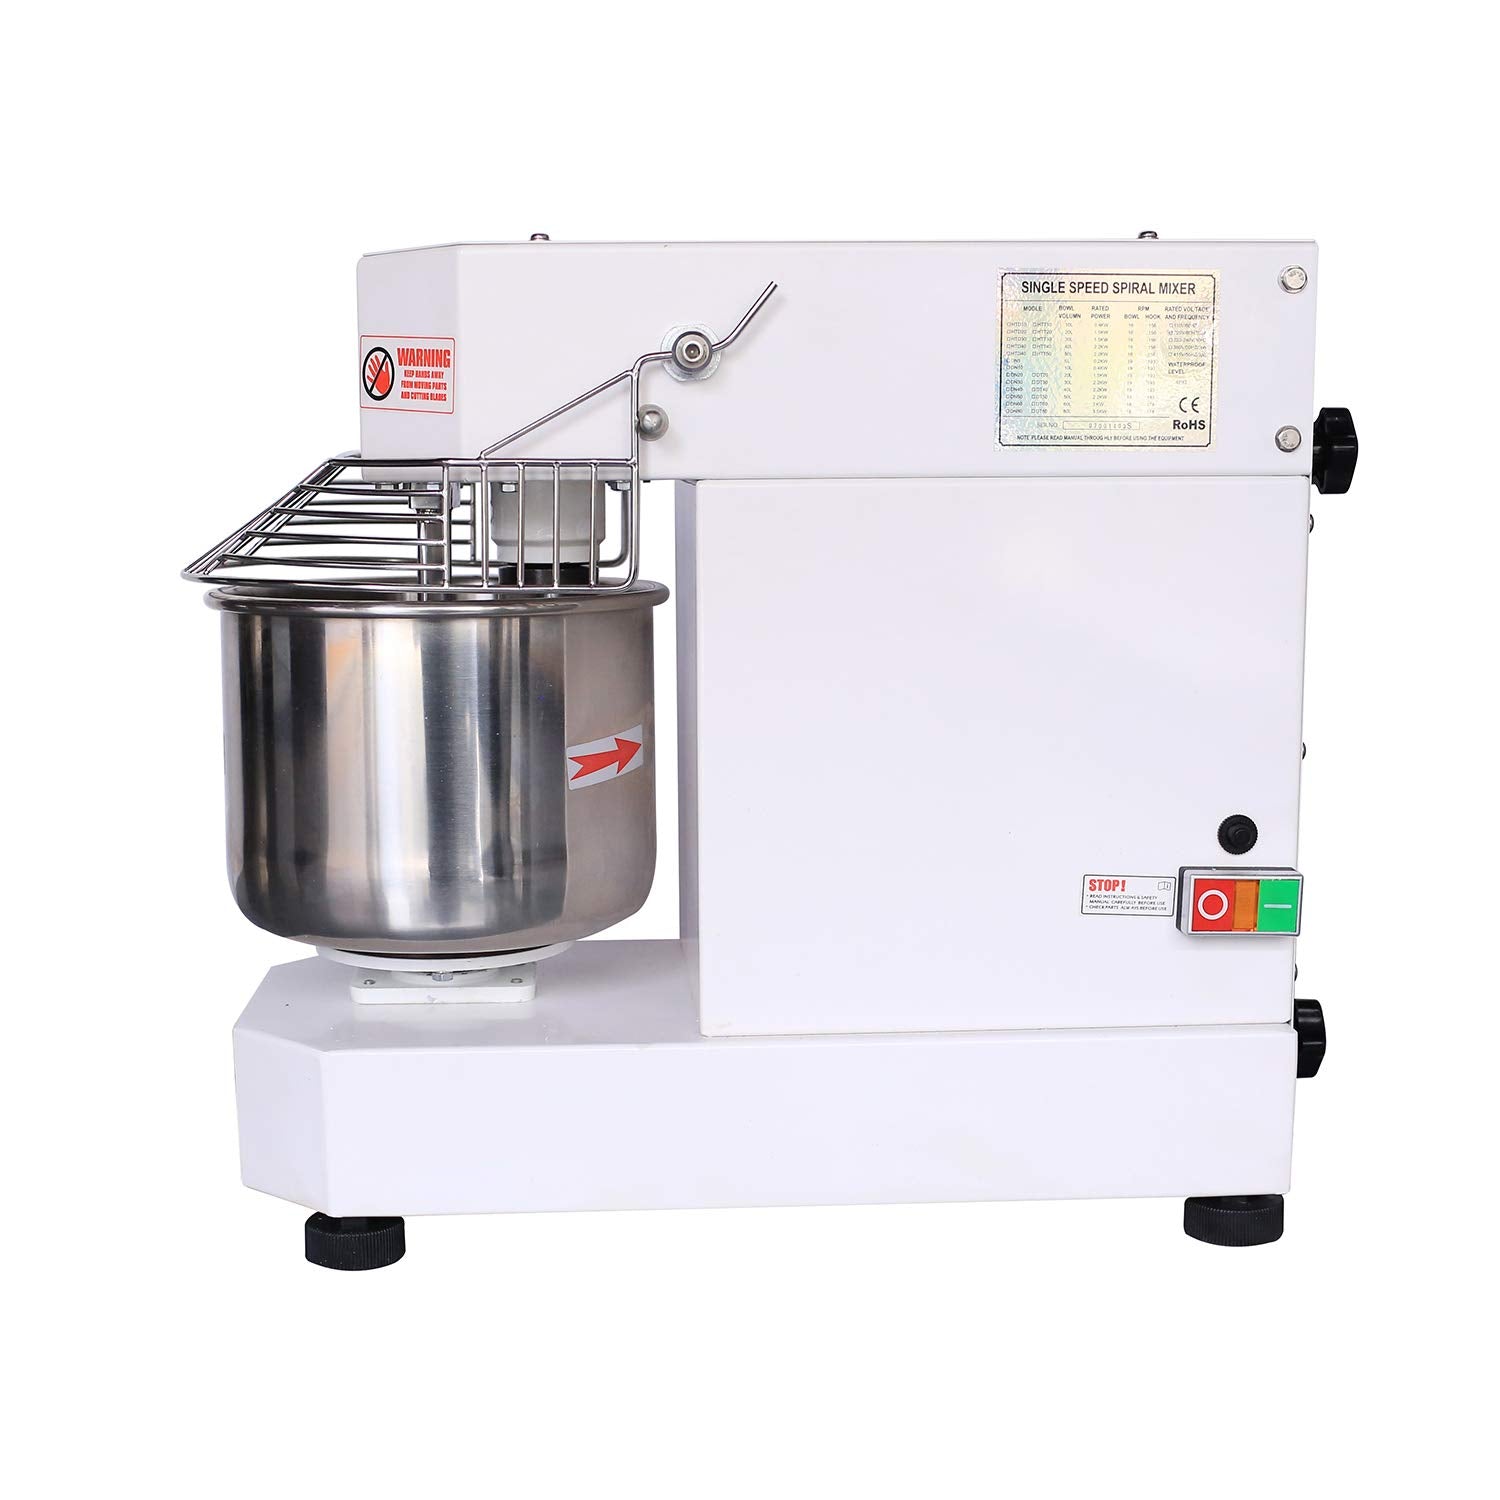 Hakka Commercial Dough Mixer, 5 Qt Spiral Mixer Food Mixer Machine with Food-grade Stainless Steel Bowl, Security Shield & Timer